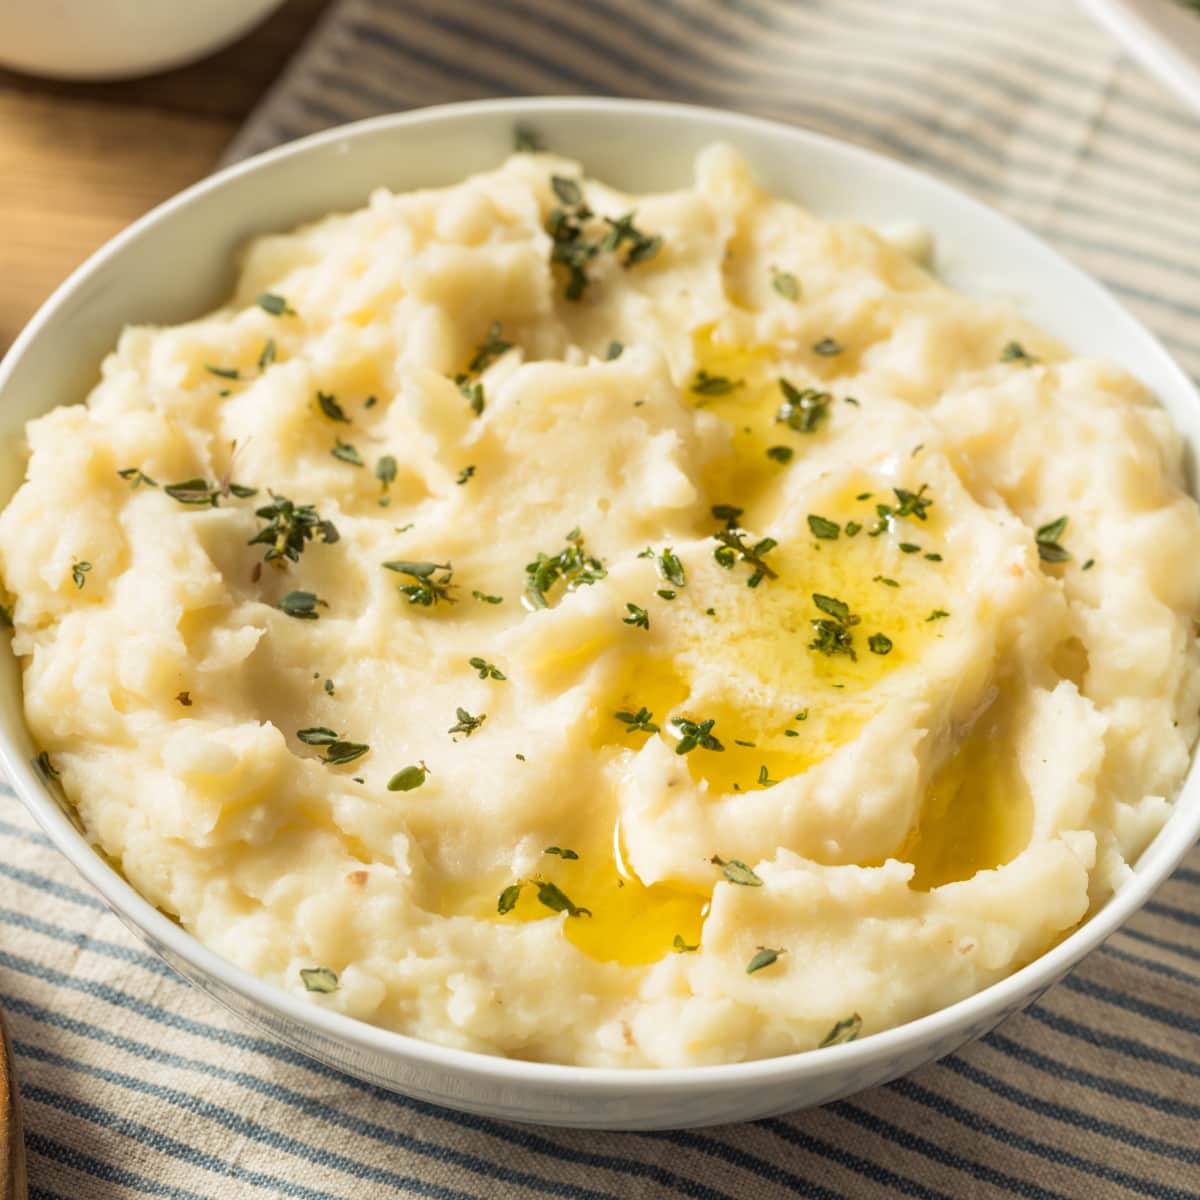 Bowl of Mashed Potatoes with Melted Butter and Herbs